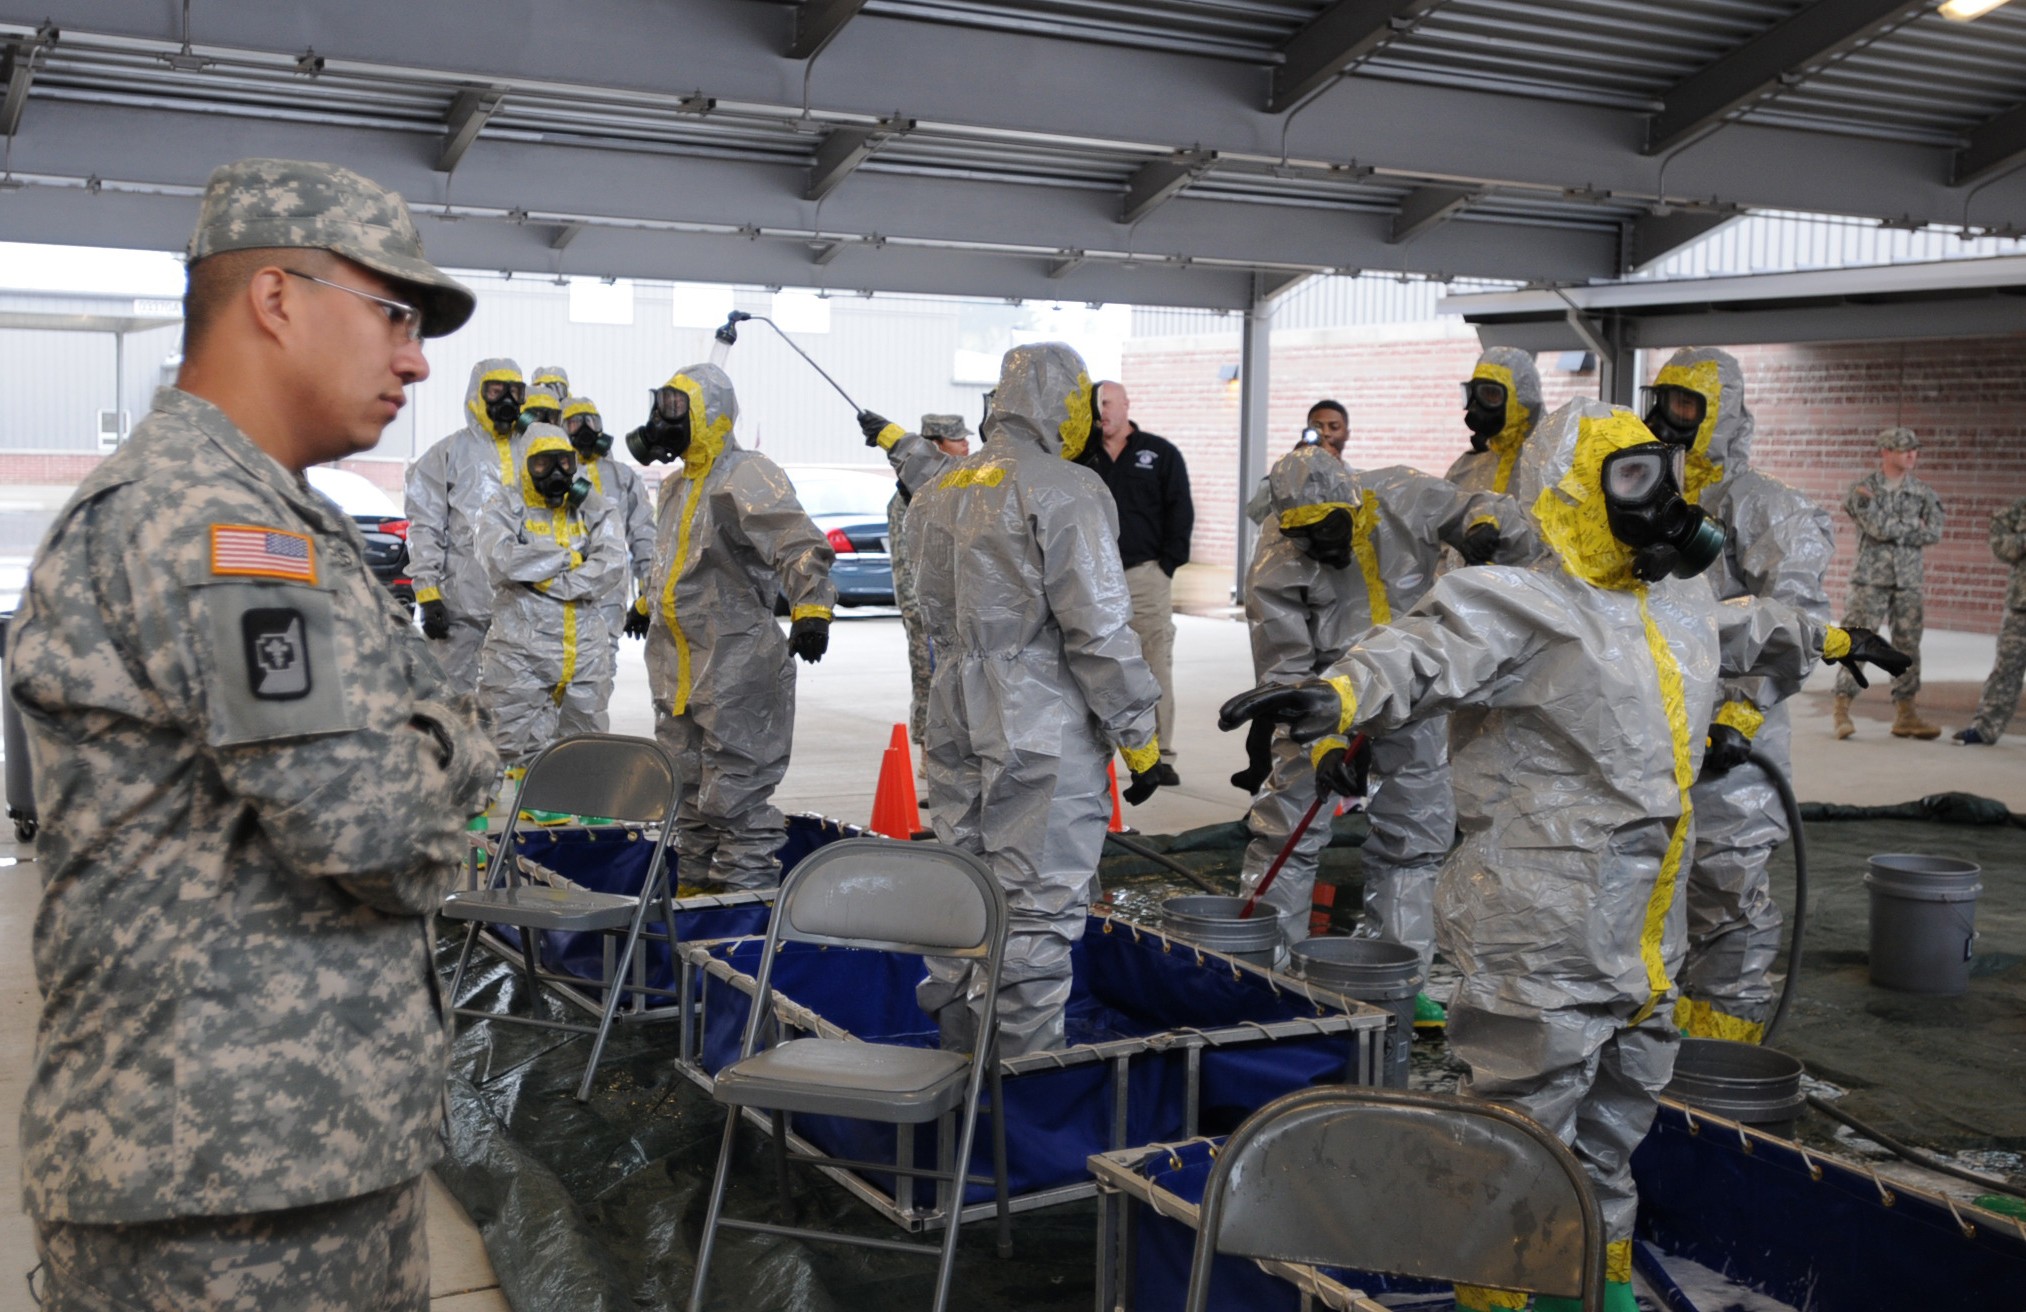 547th Medical Co. trains on HAZMAT incident response Article The